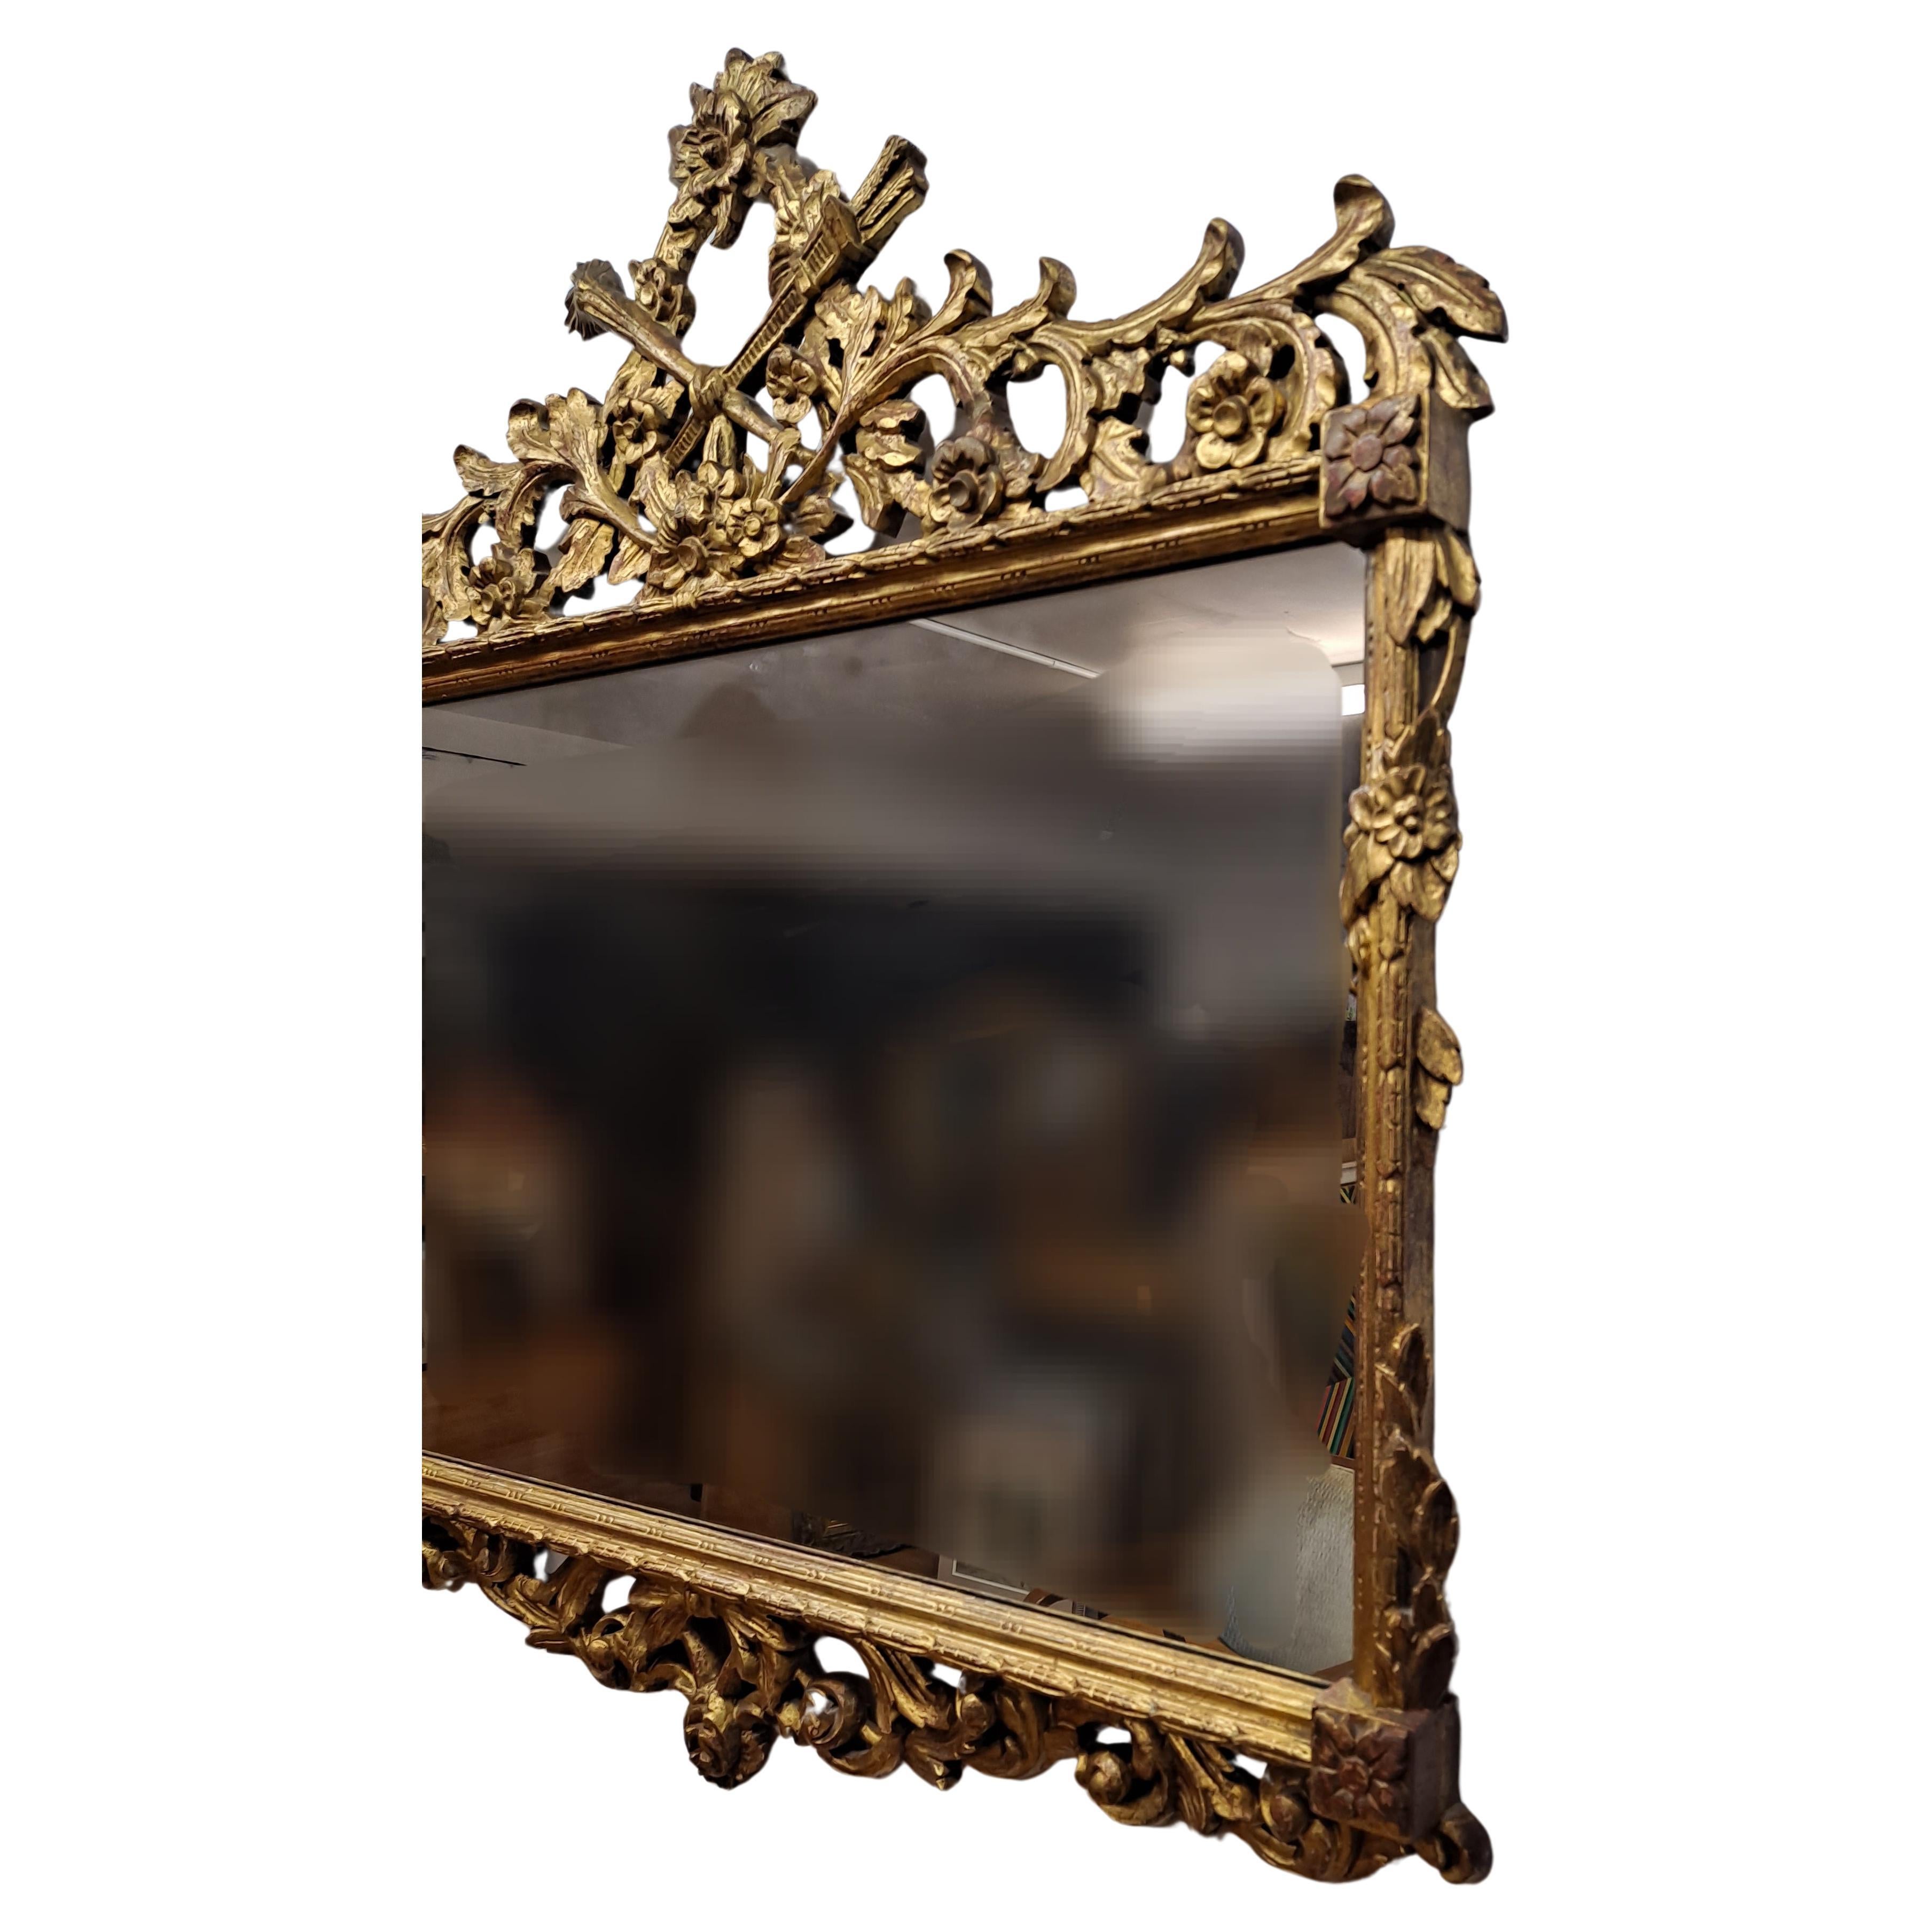 Spectacular victorian baroque style floral carved giltwood mirror

Mirror: 23